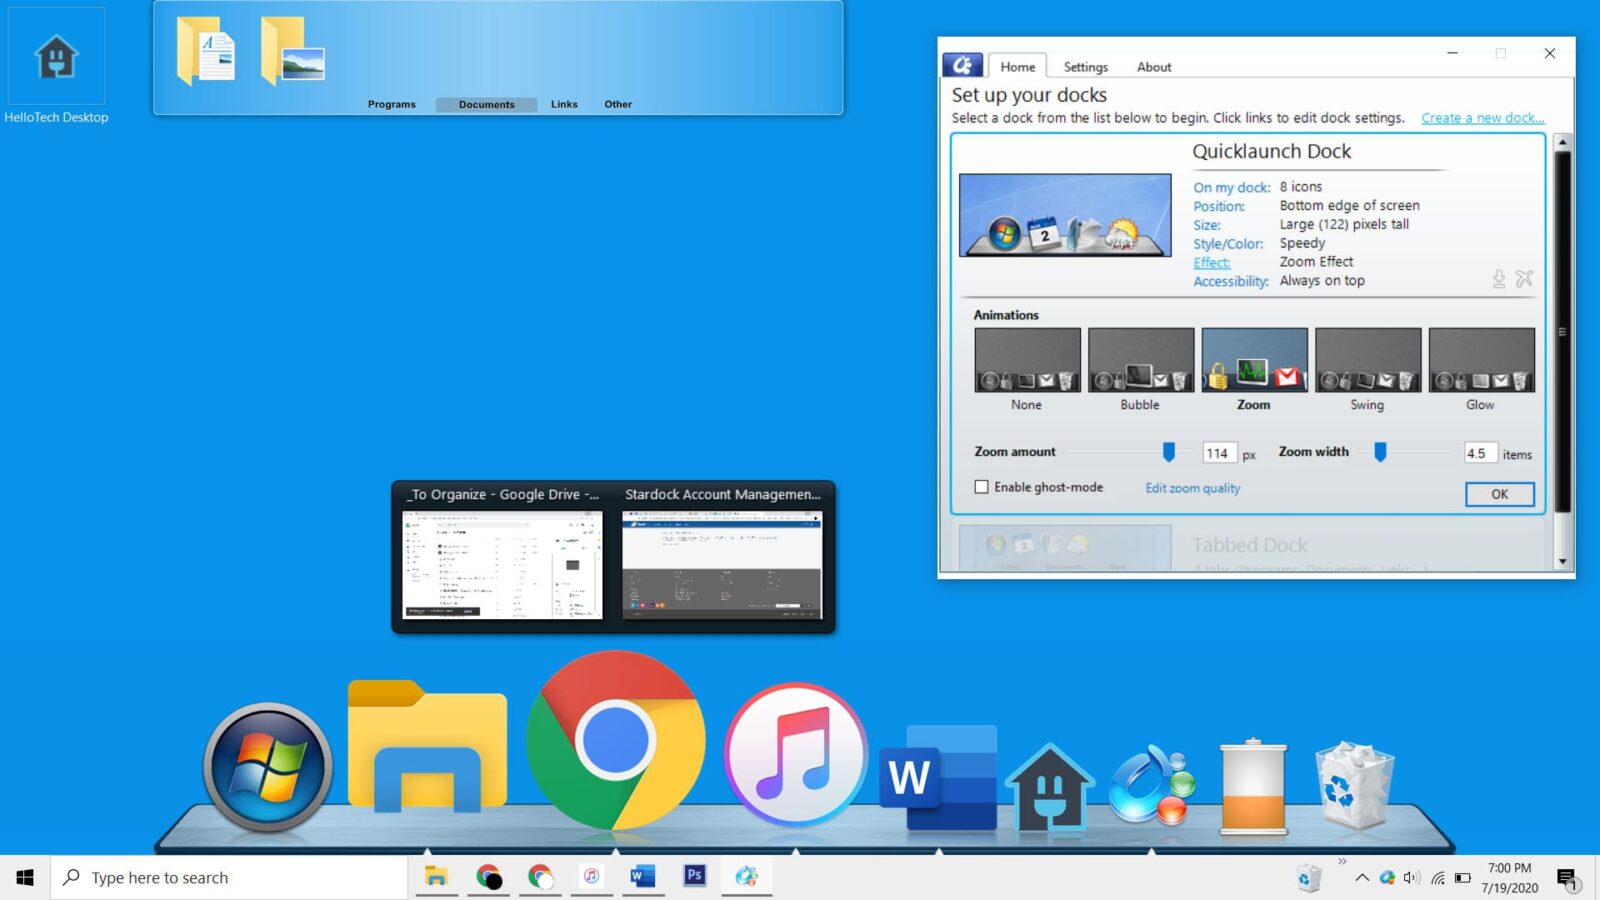 uDock free download